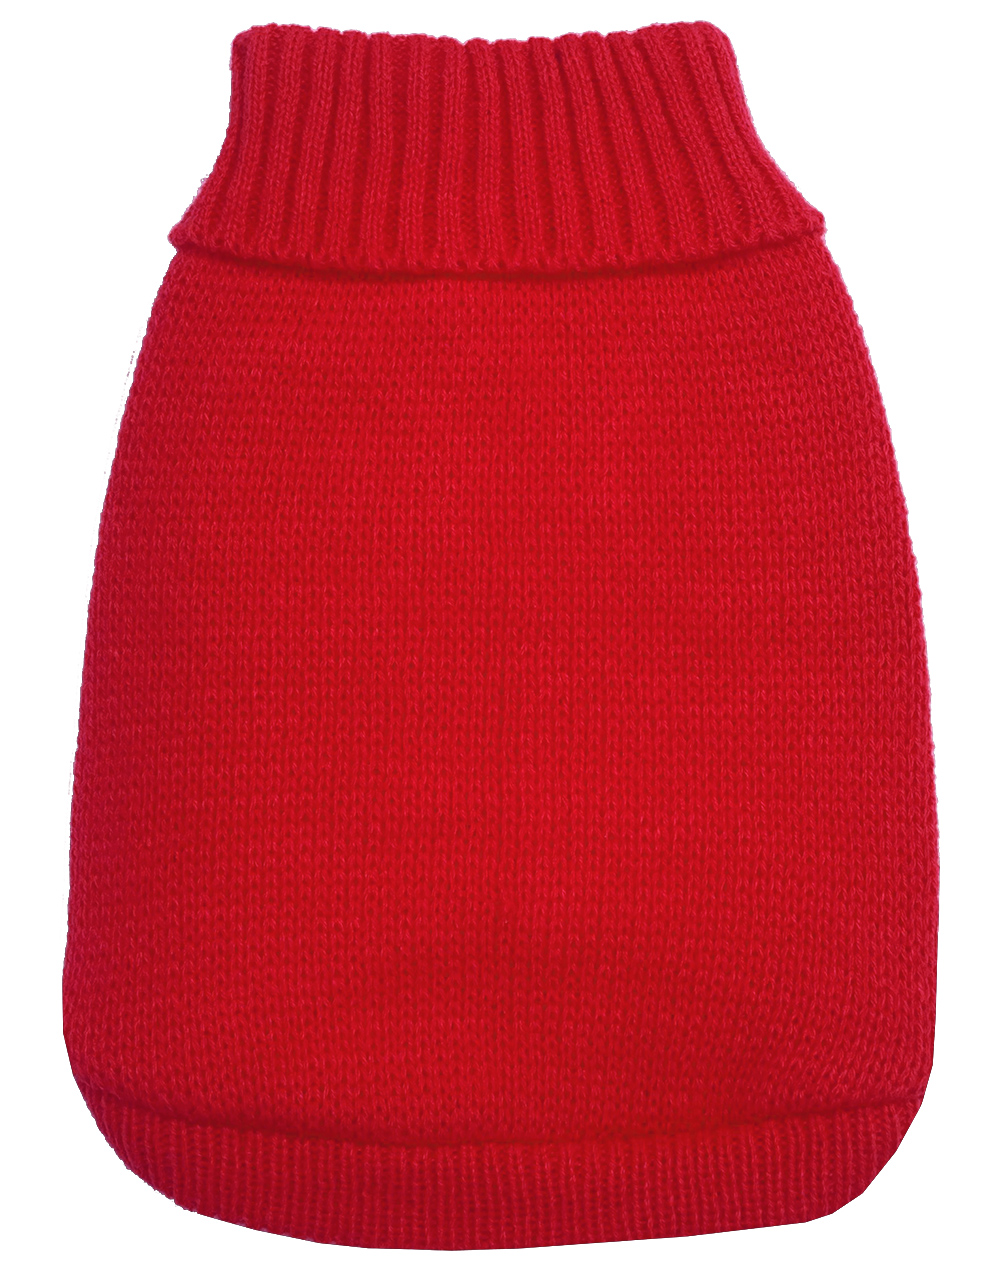 Knit Pet Sweater Red Size 5X